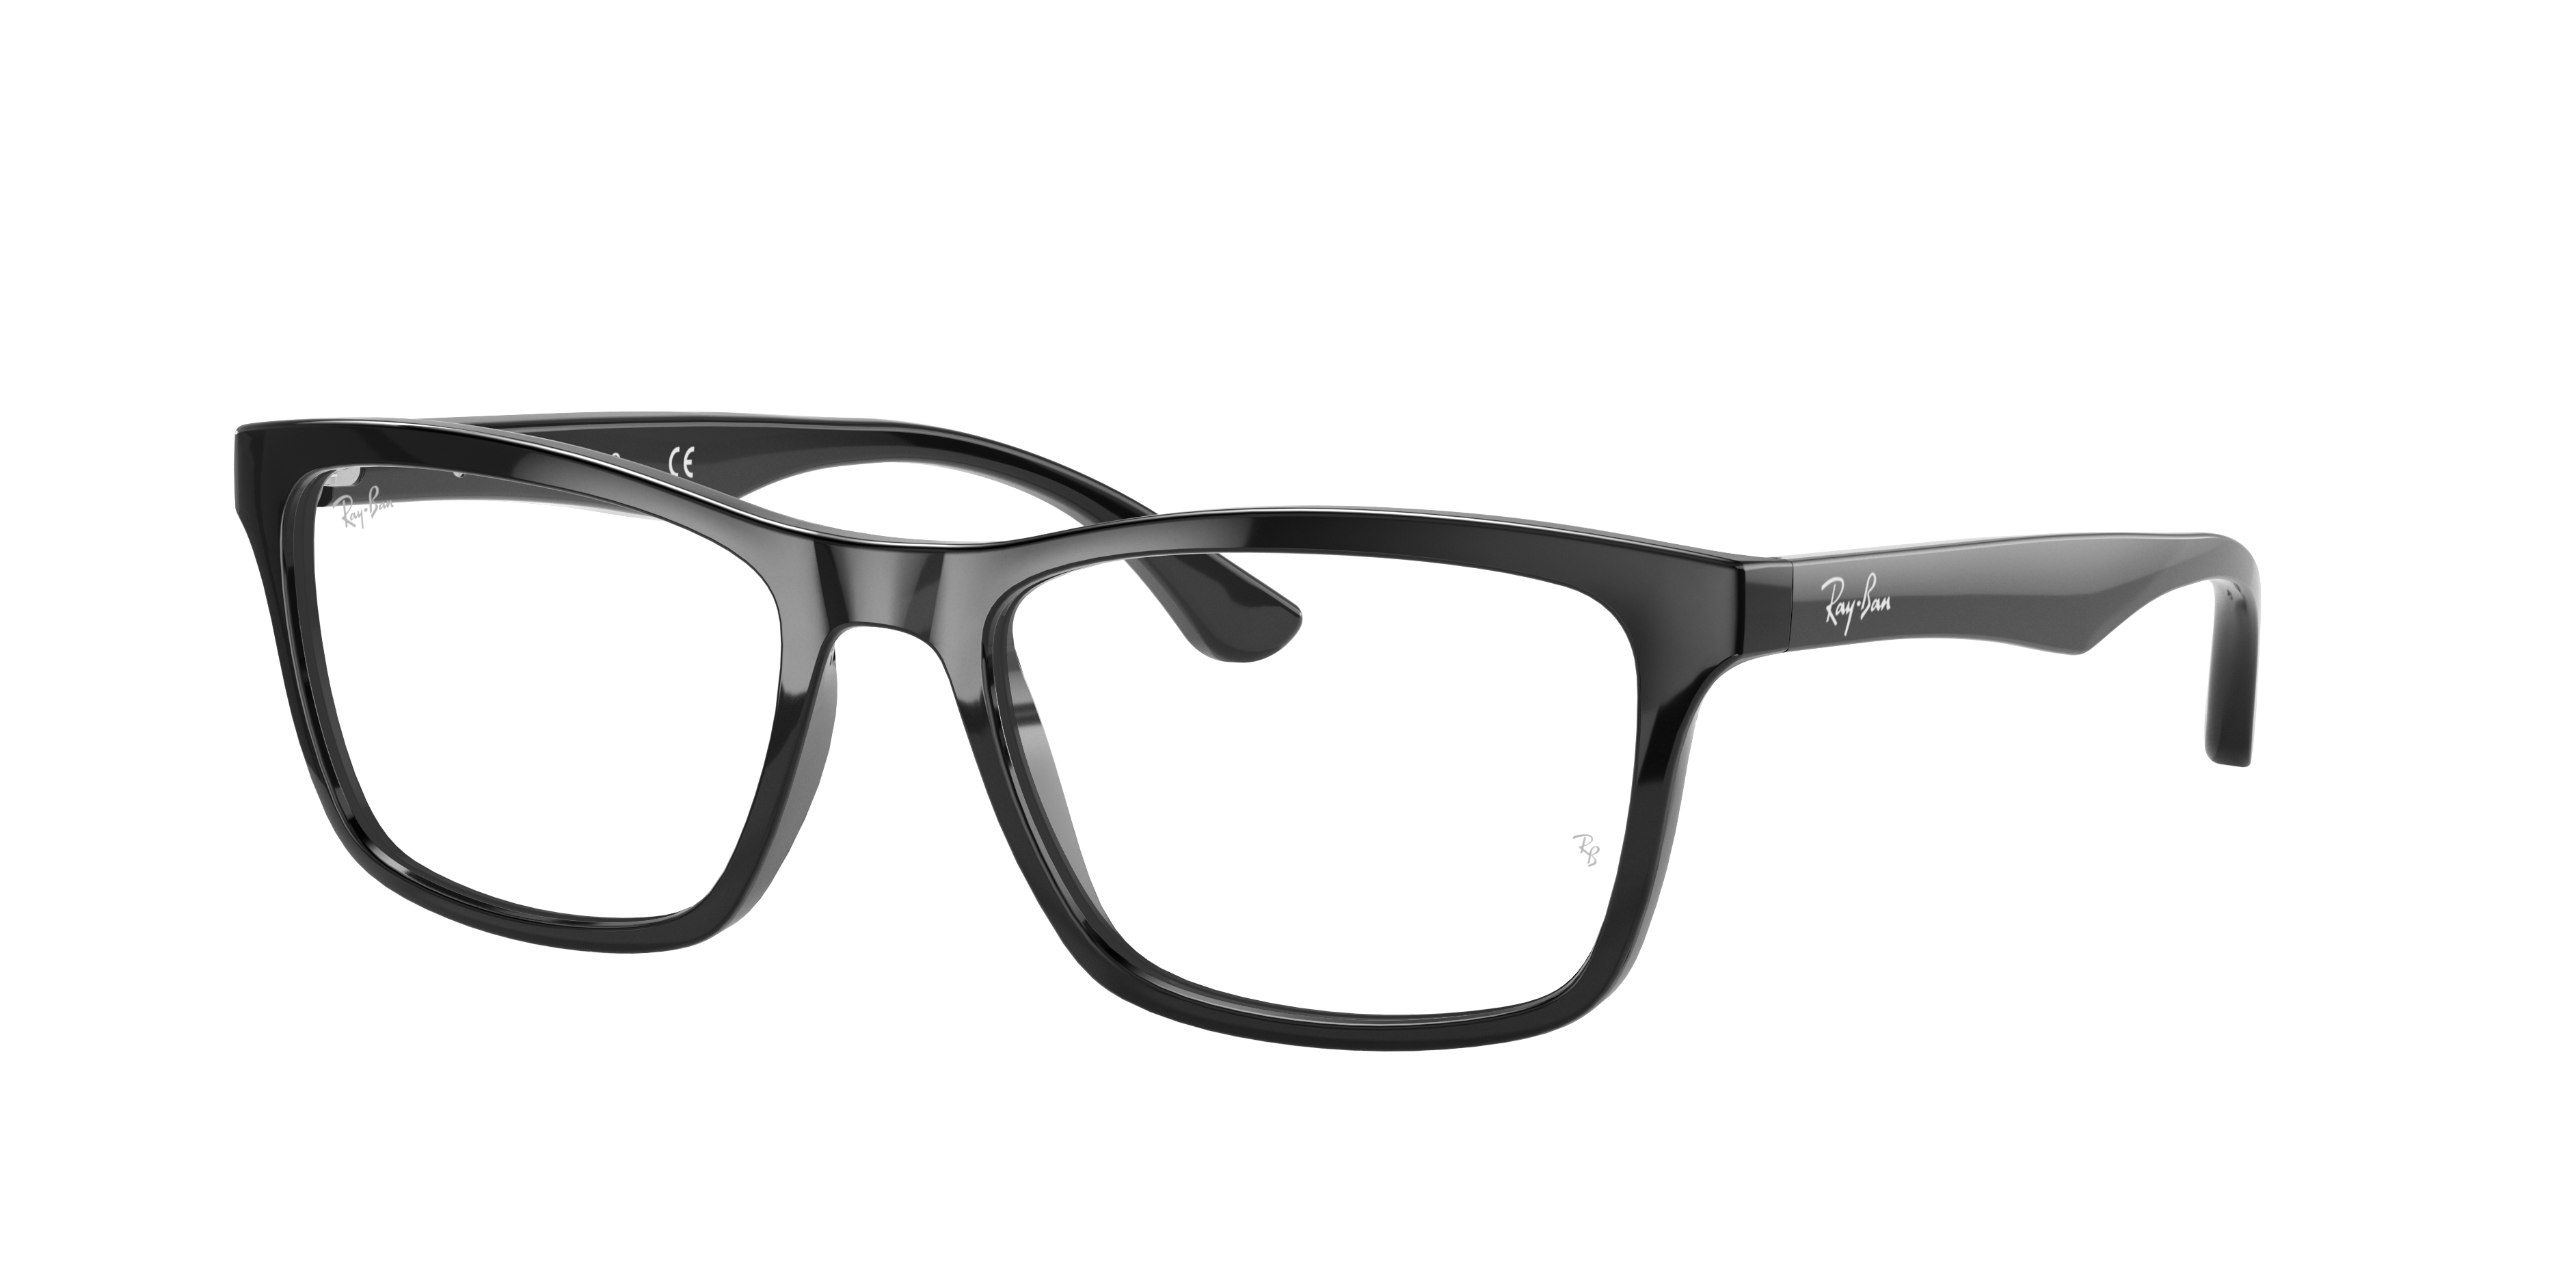 Ray-Ban 0RX5279 in Black Glasses | OPSM